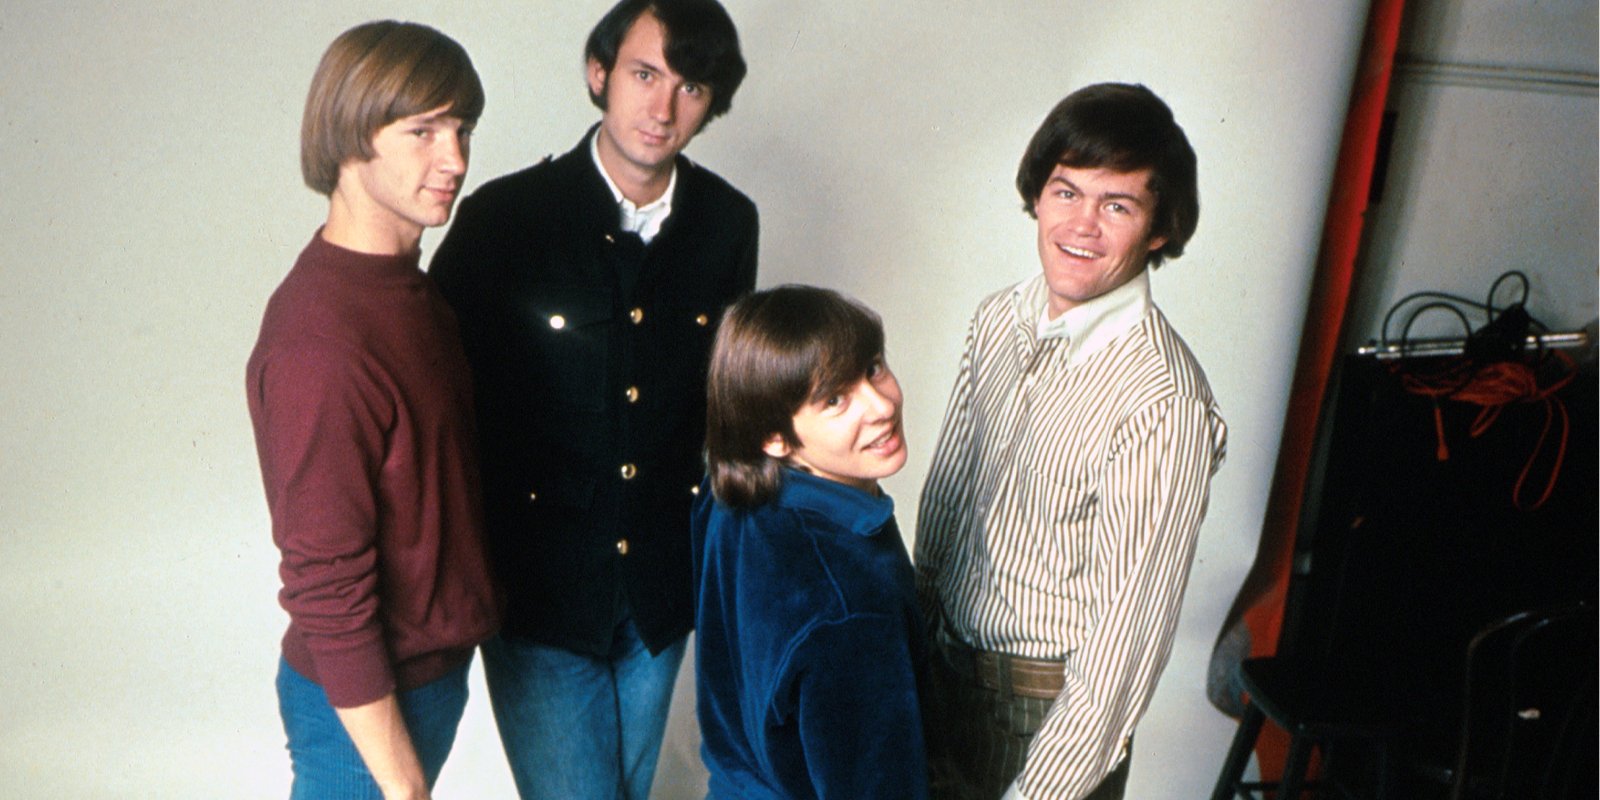 Peter Tork, Mike Nesmith, Davy Jones and Mickey Dolenz of The Monkees.